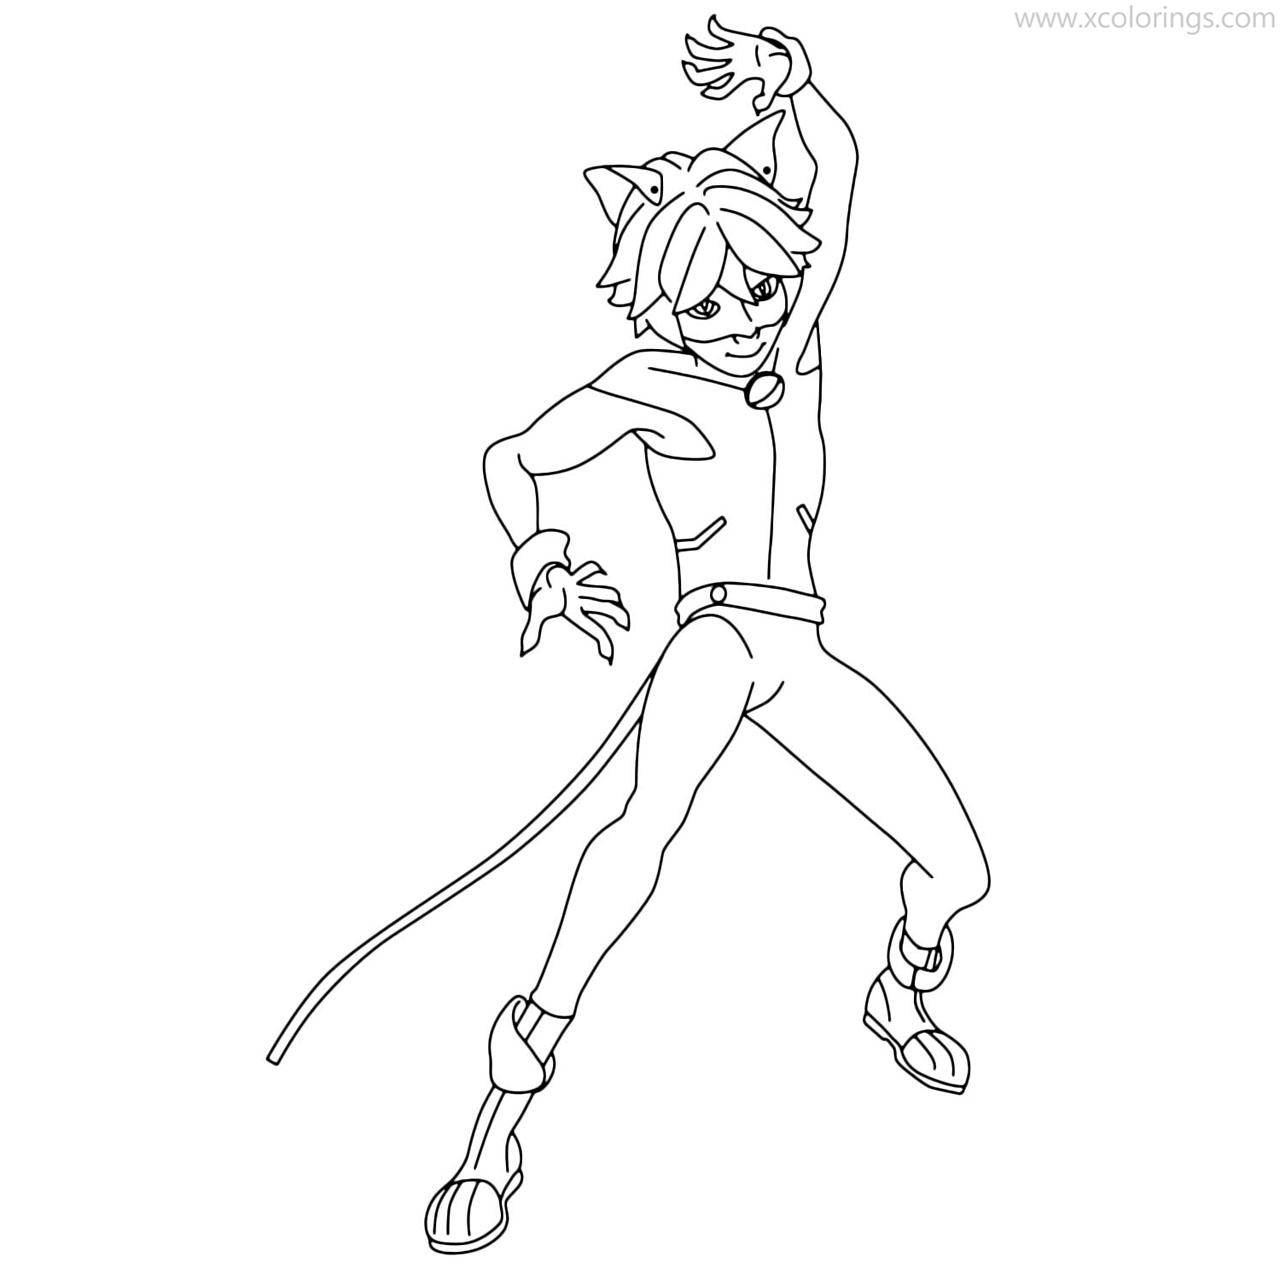 Miraculous Ladybug Coloring Pages Character Adrien Agreste XColorings